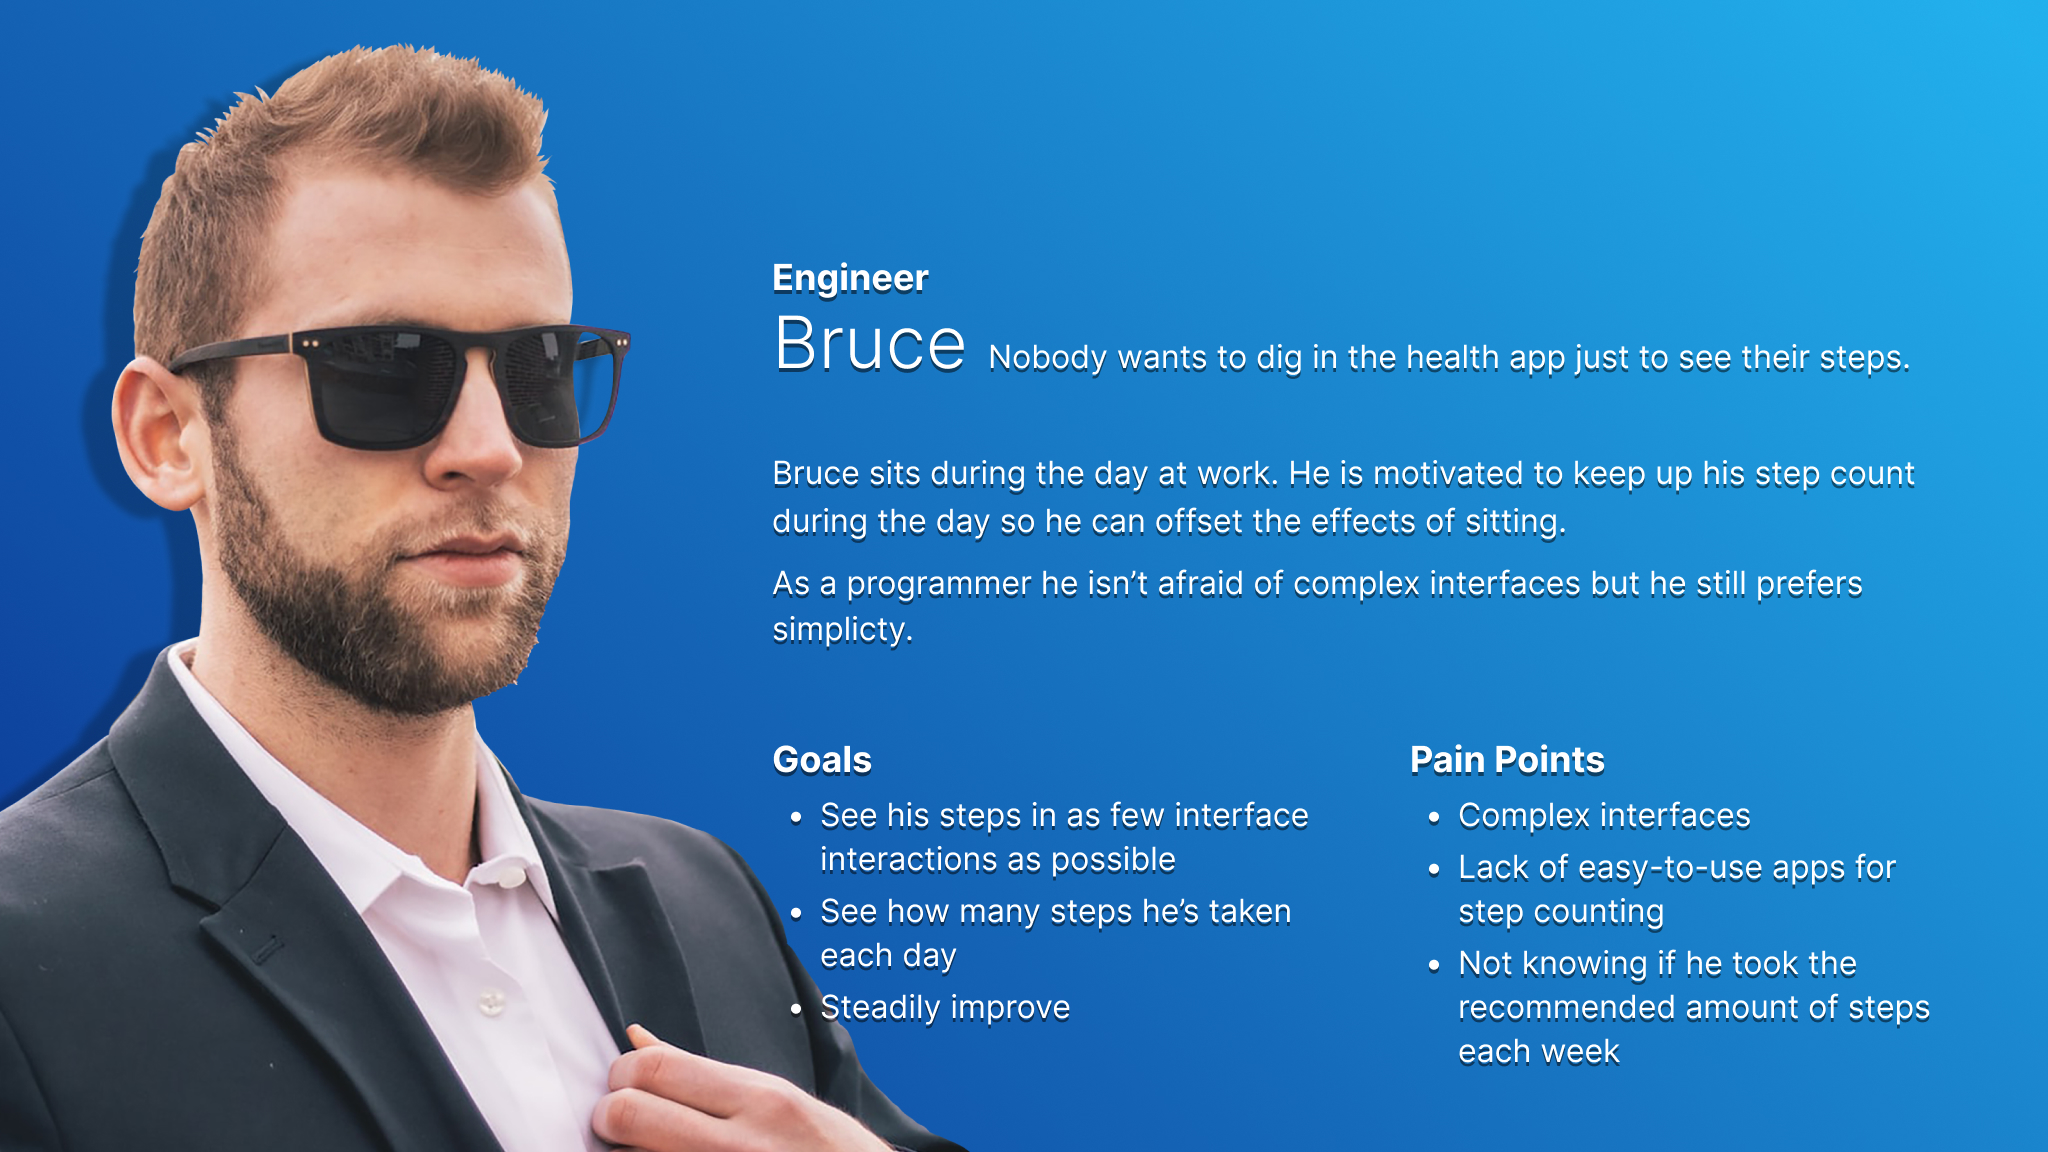 Persona card for Bruce who represents users who can easily navigate complexity but prefer something requiring less thought.